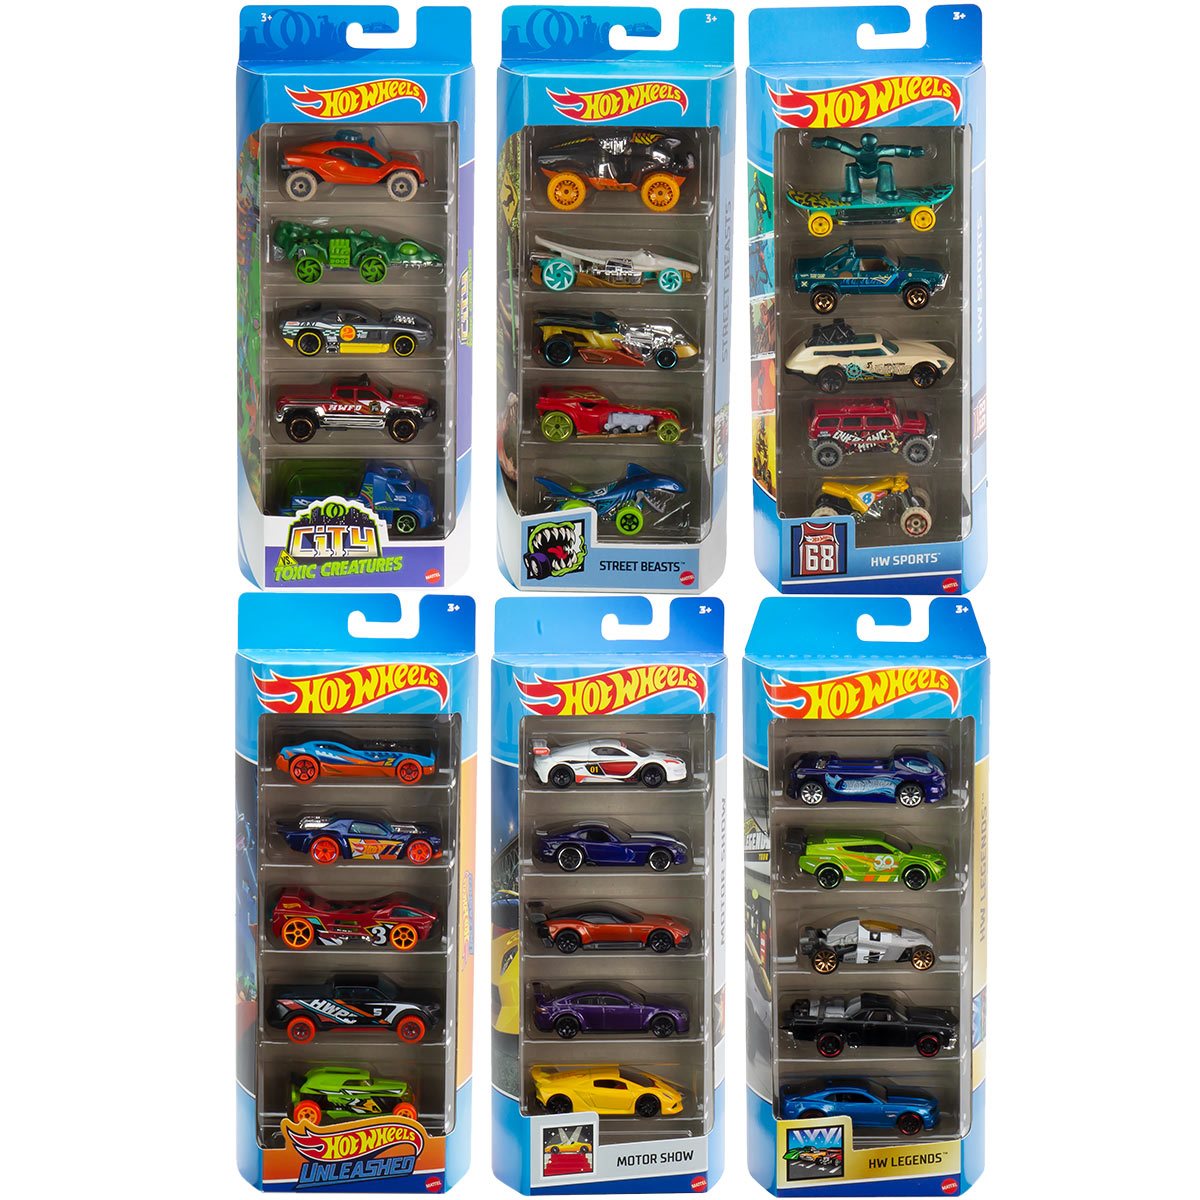 2022 — Hot Wheels Holiday Edition 2021 Just Released 5 car set Ships Fast!